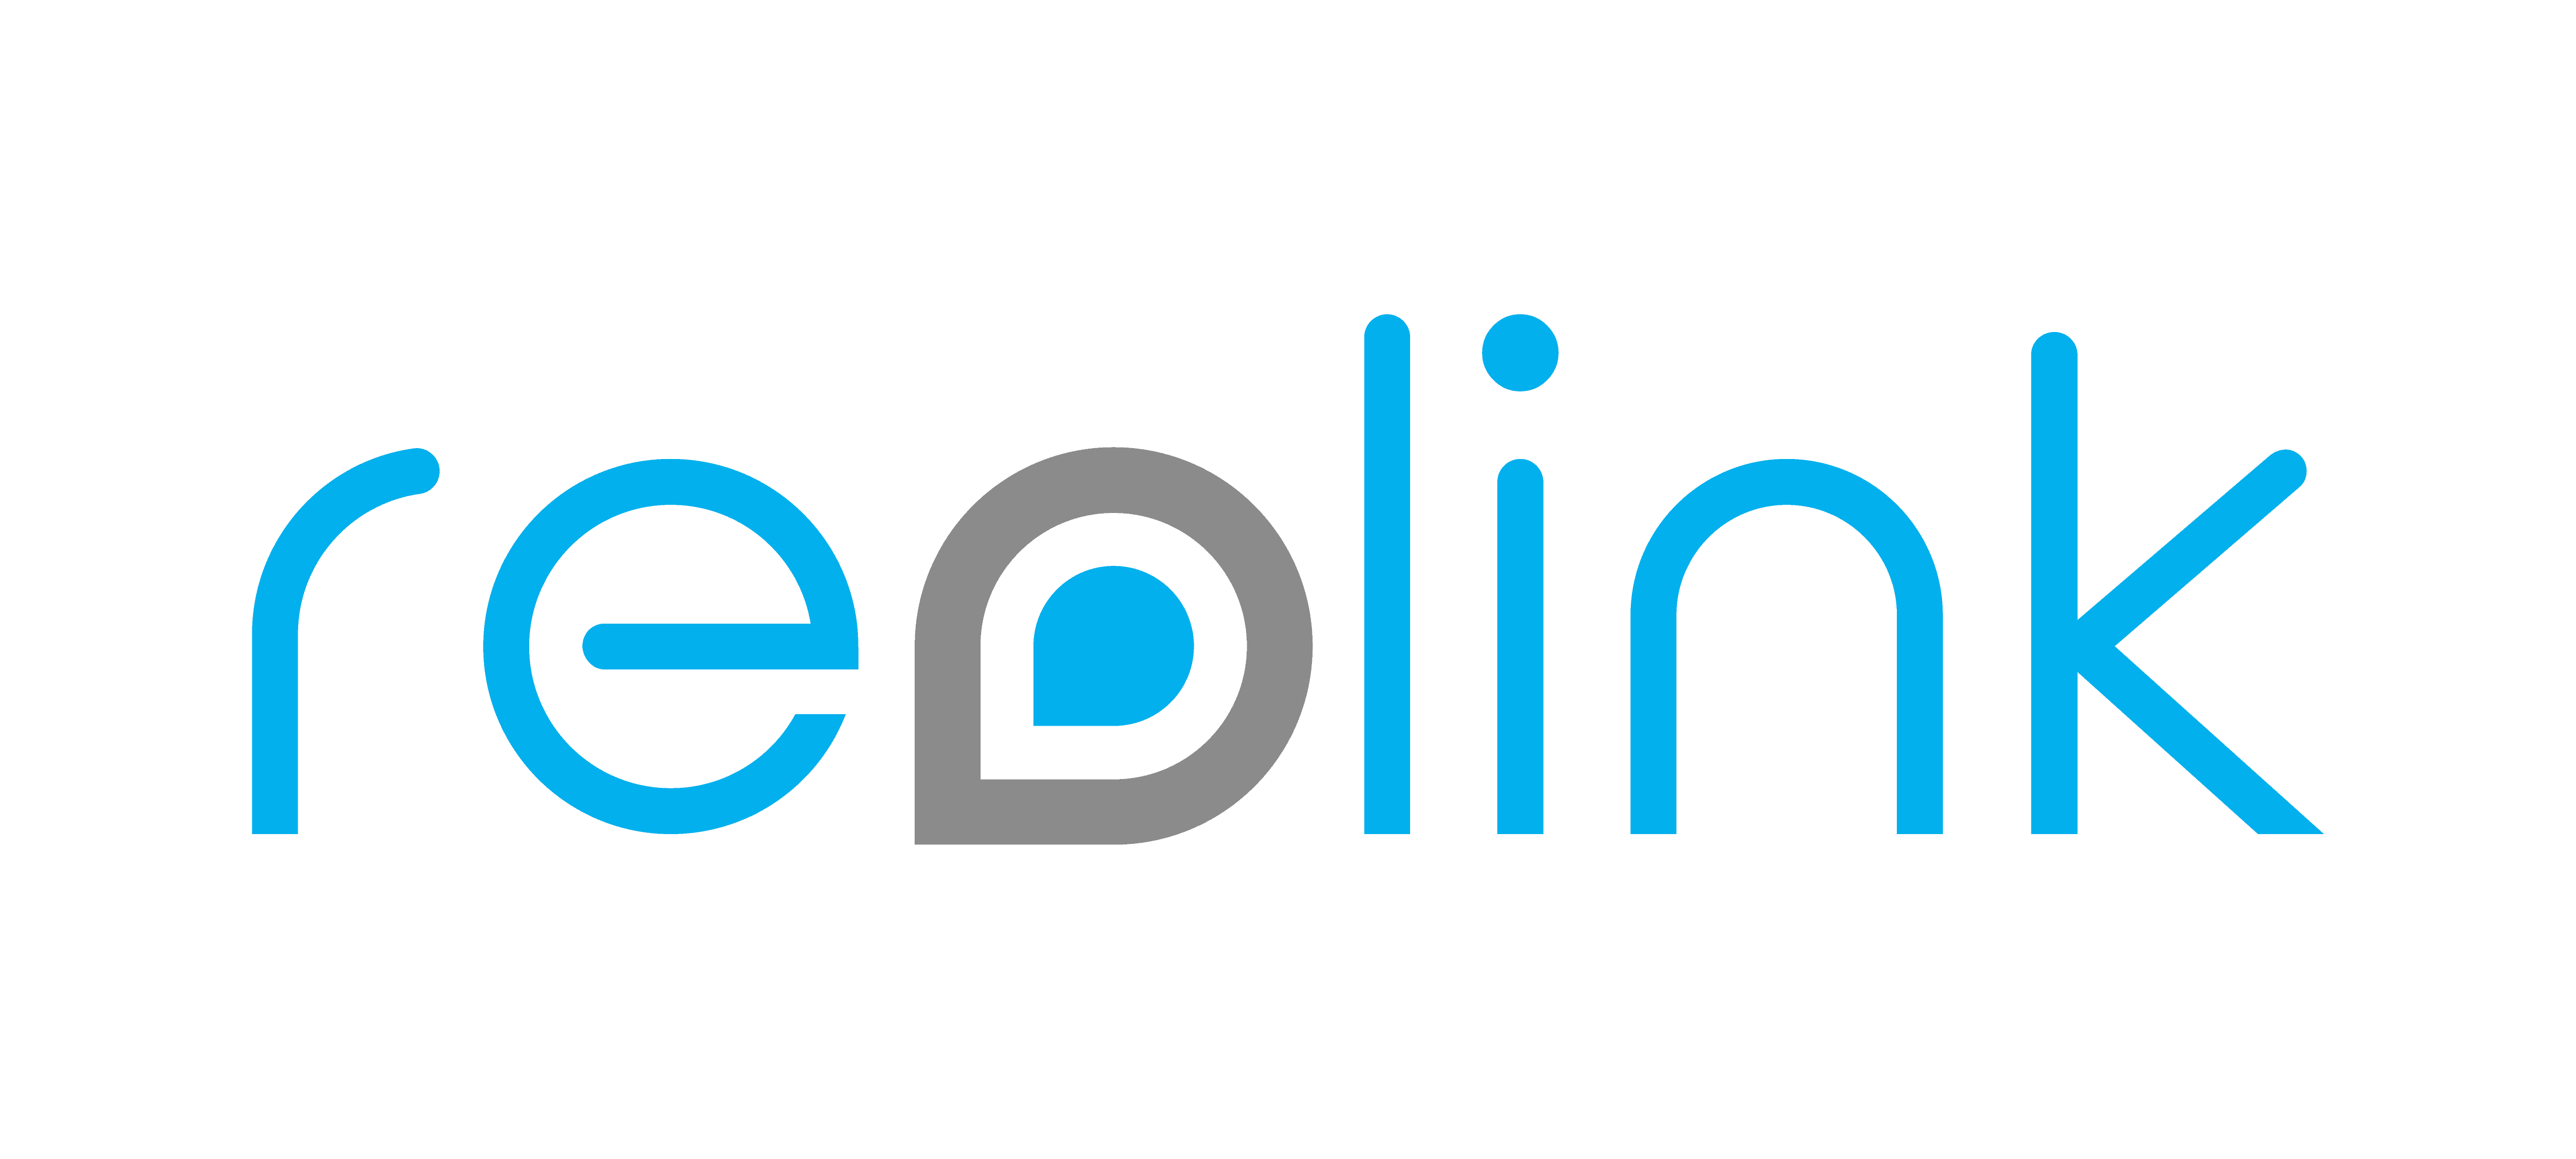 Reolink - Product Logo